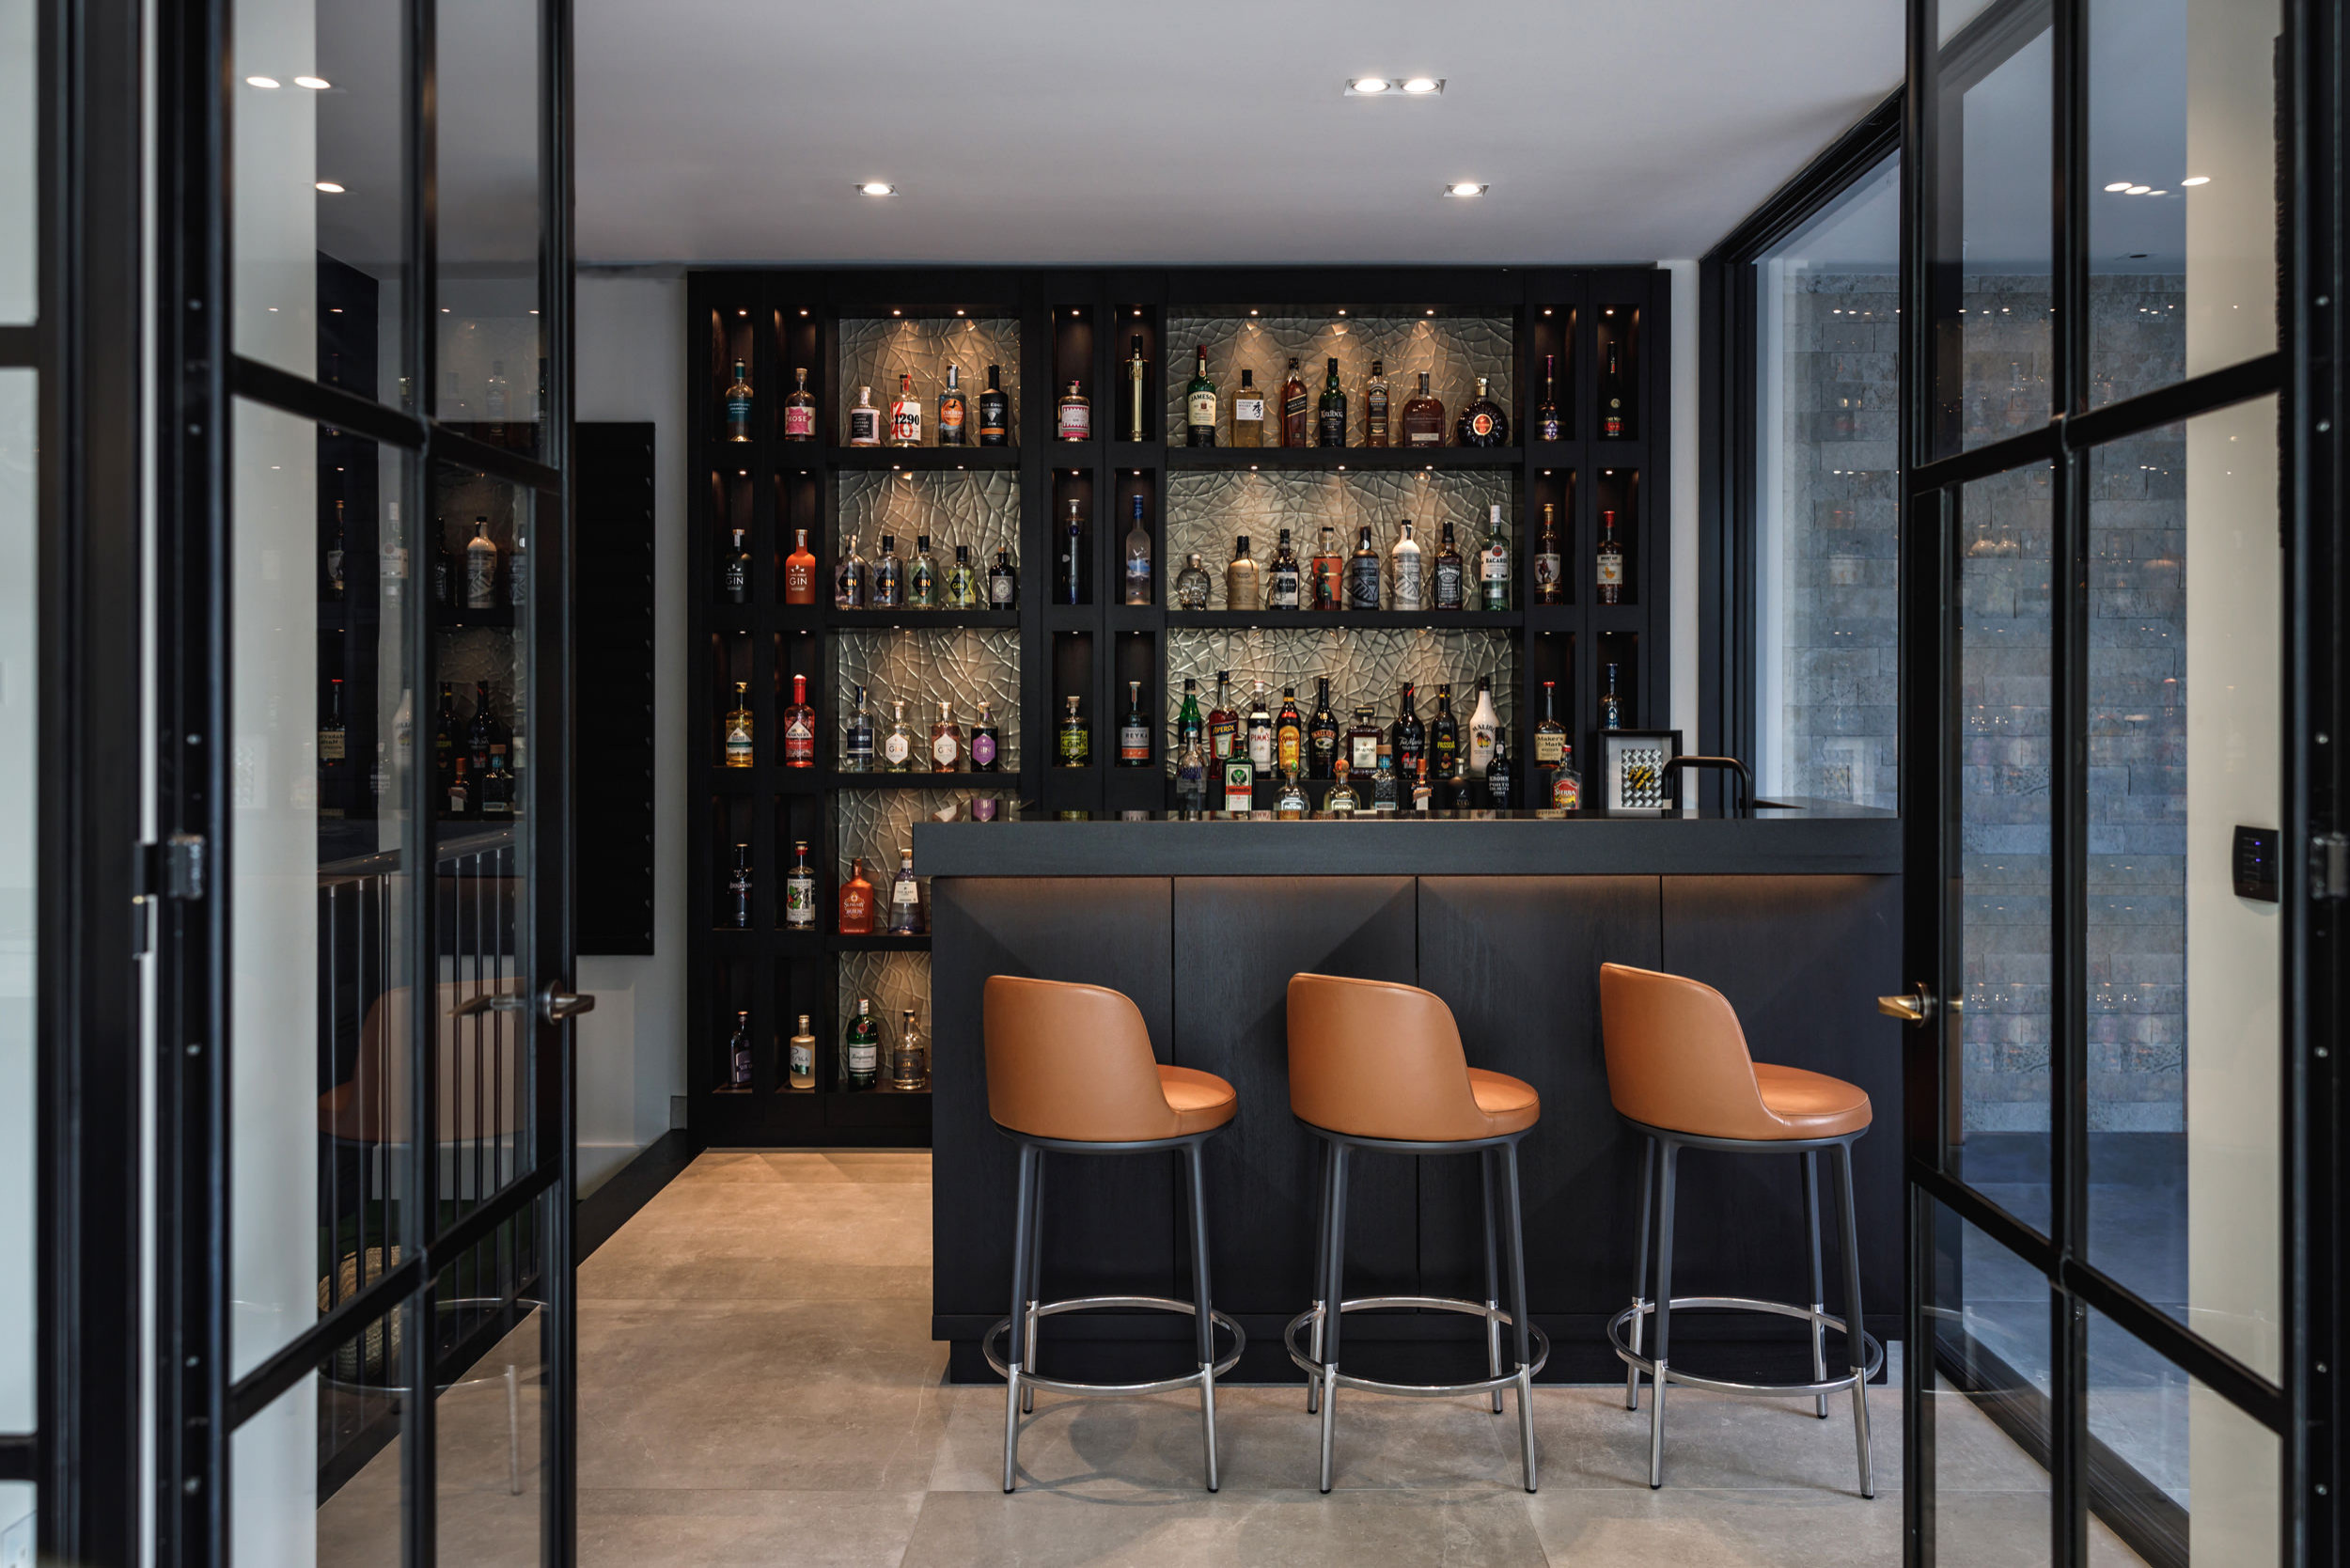 Modern bar interior with stools and shelves of liquor bottles.